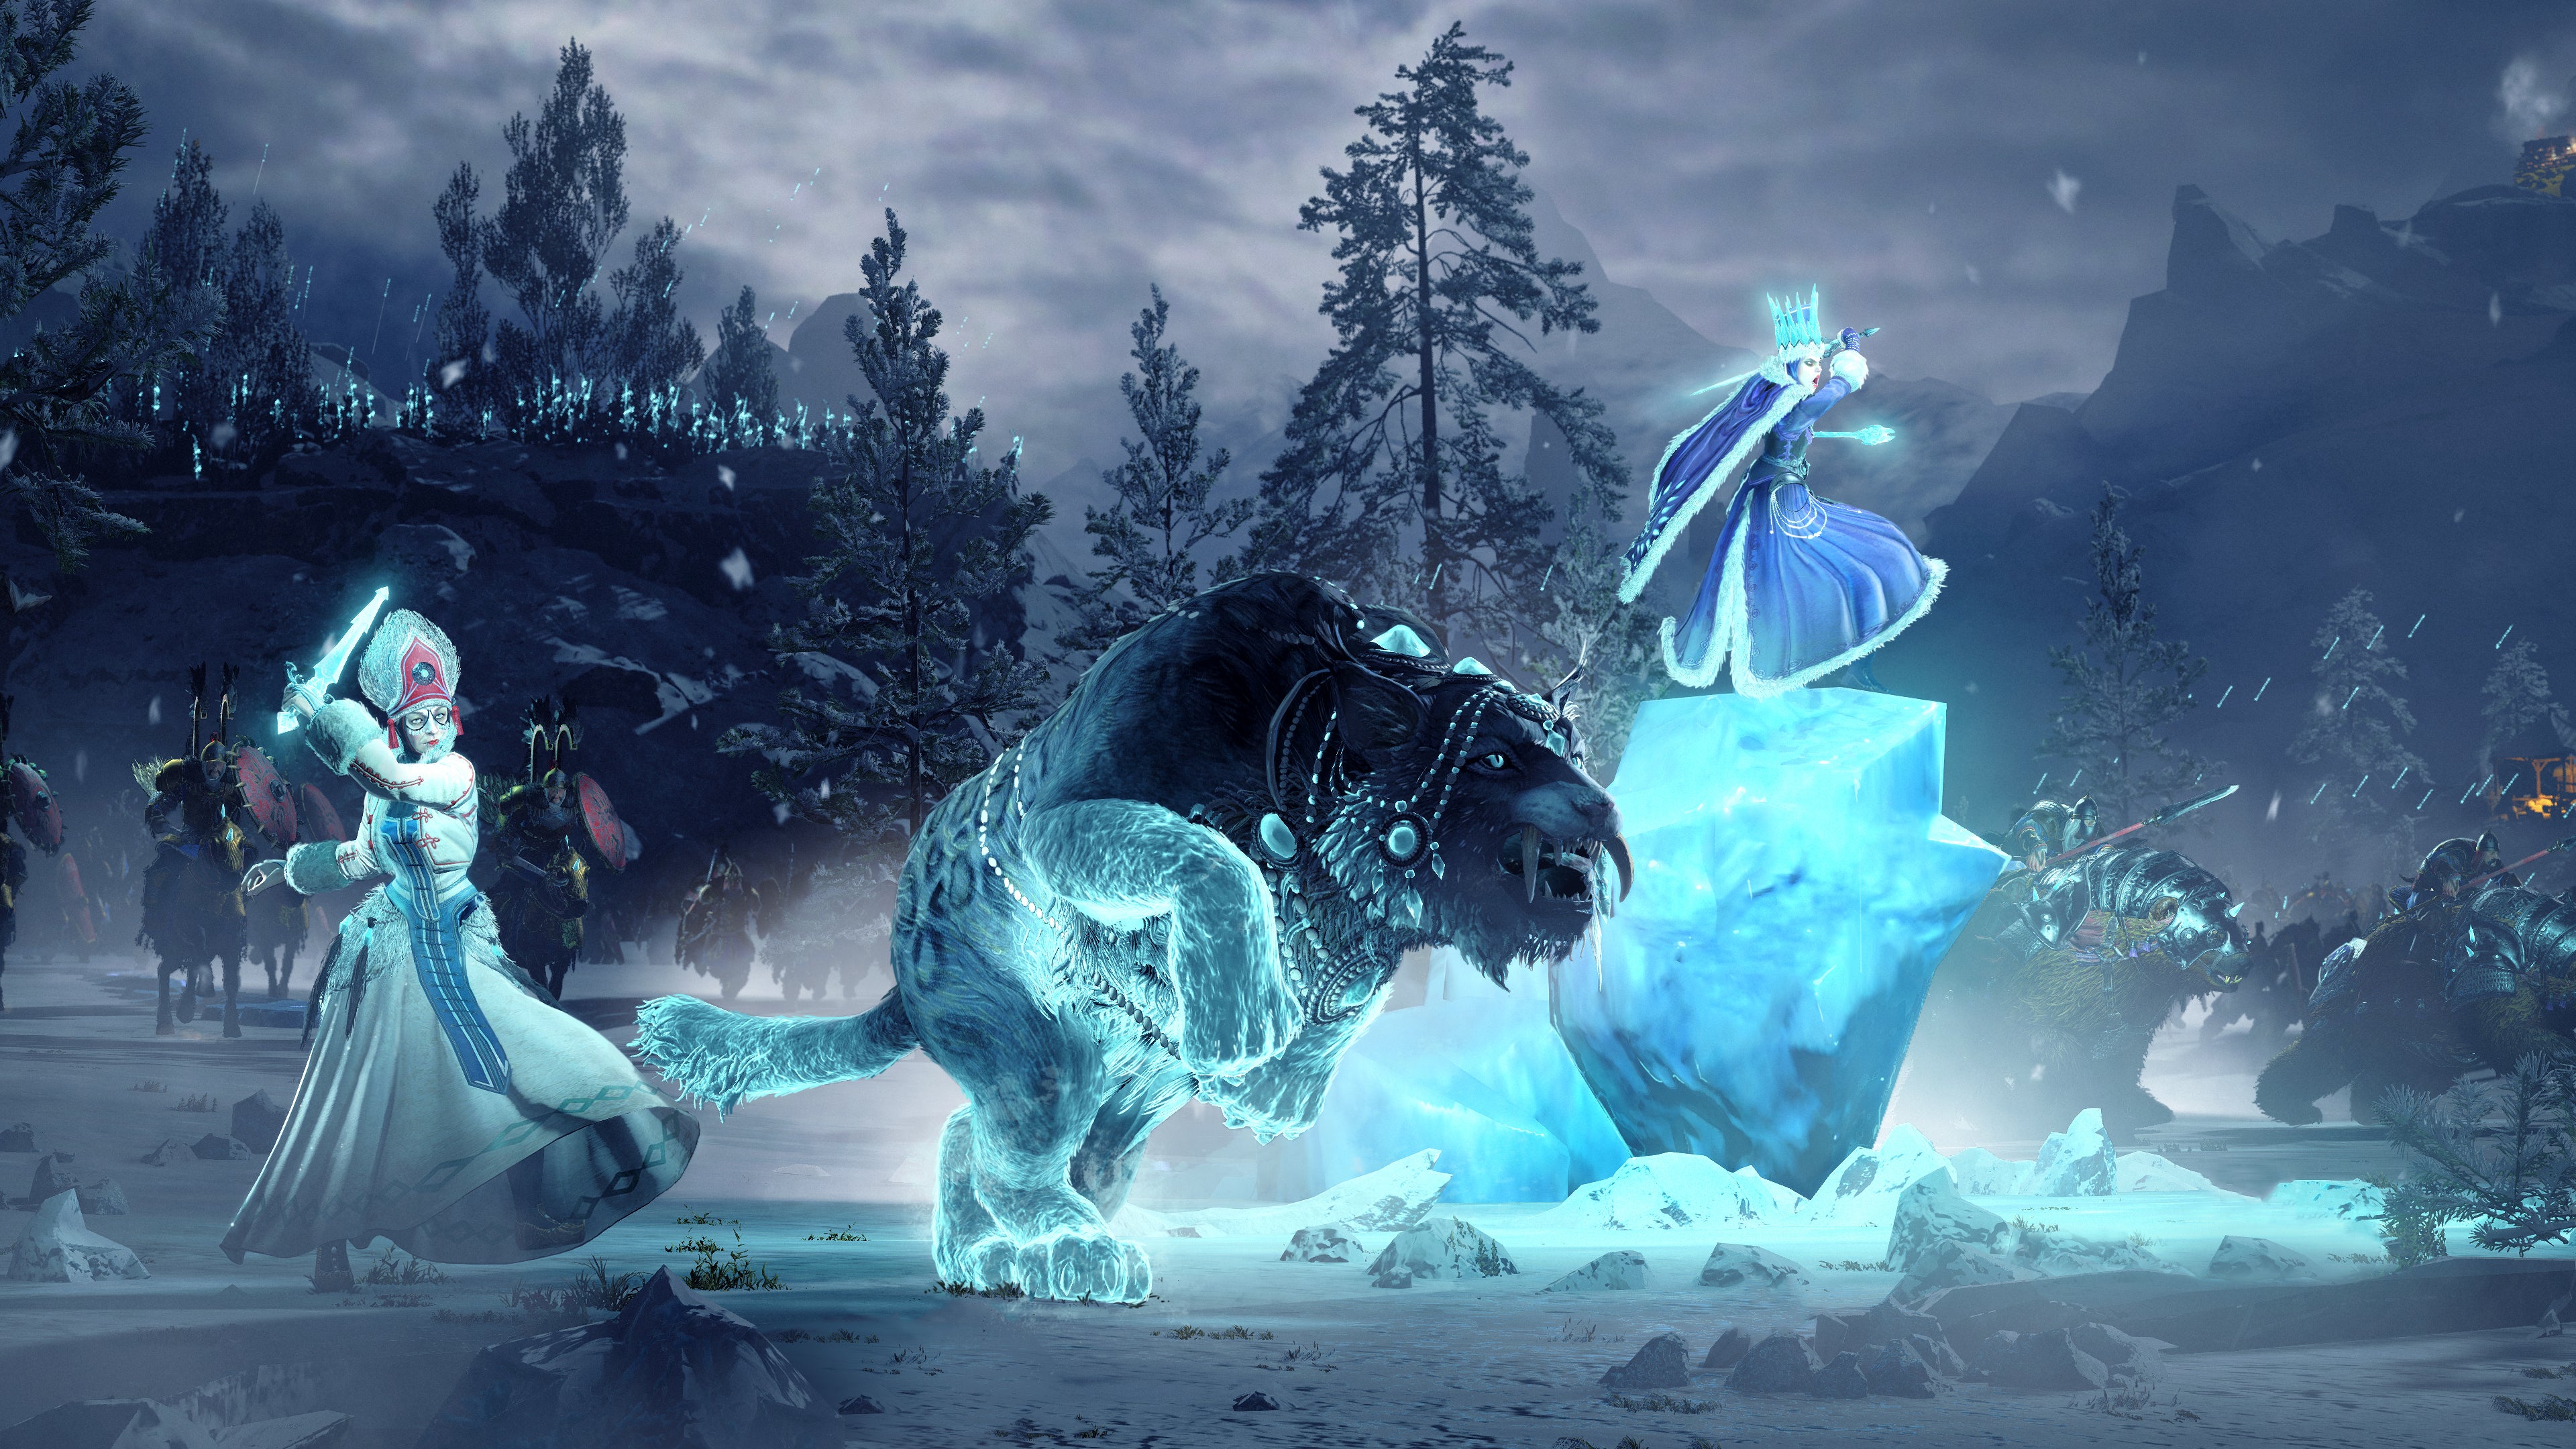 Image for Total War: Warhammer 3 video introduces you to the realm of the Ice Queen